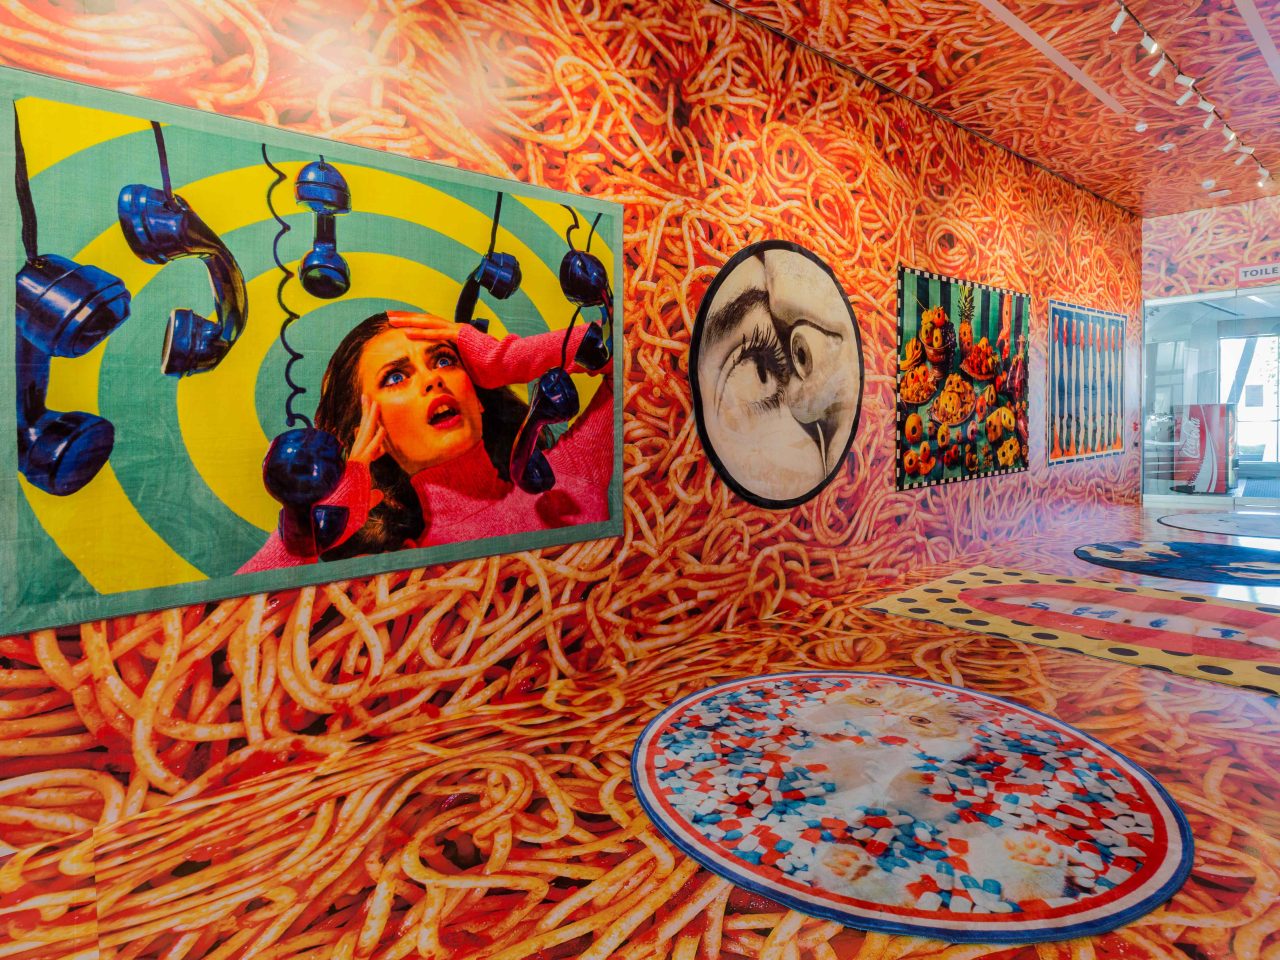 Hallway wrapped in detail image of spaghetti, psychedelic photos hanging on wall.